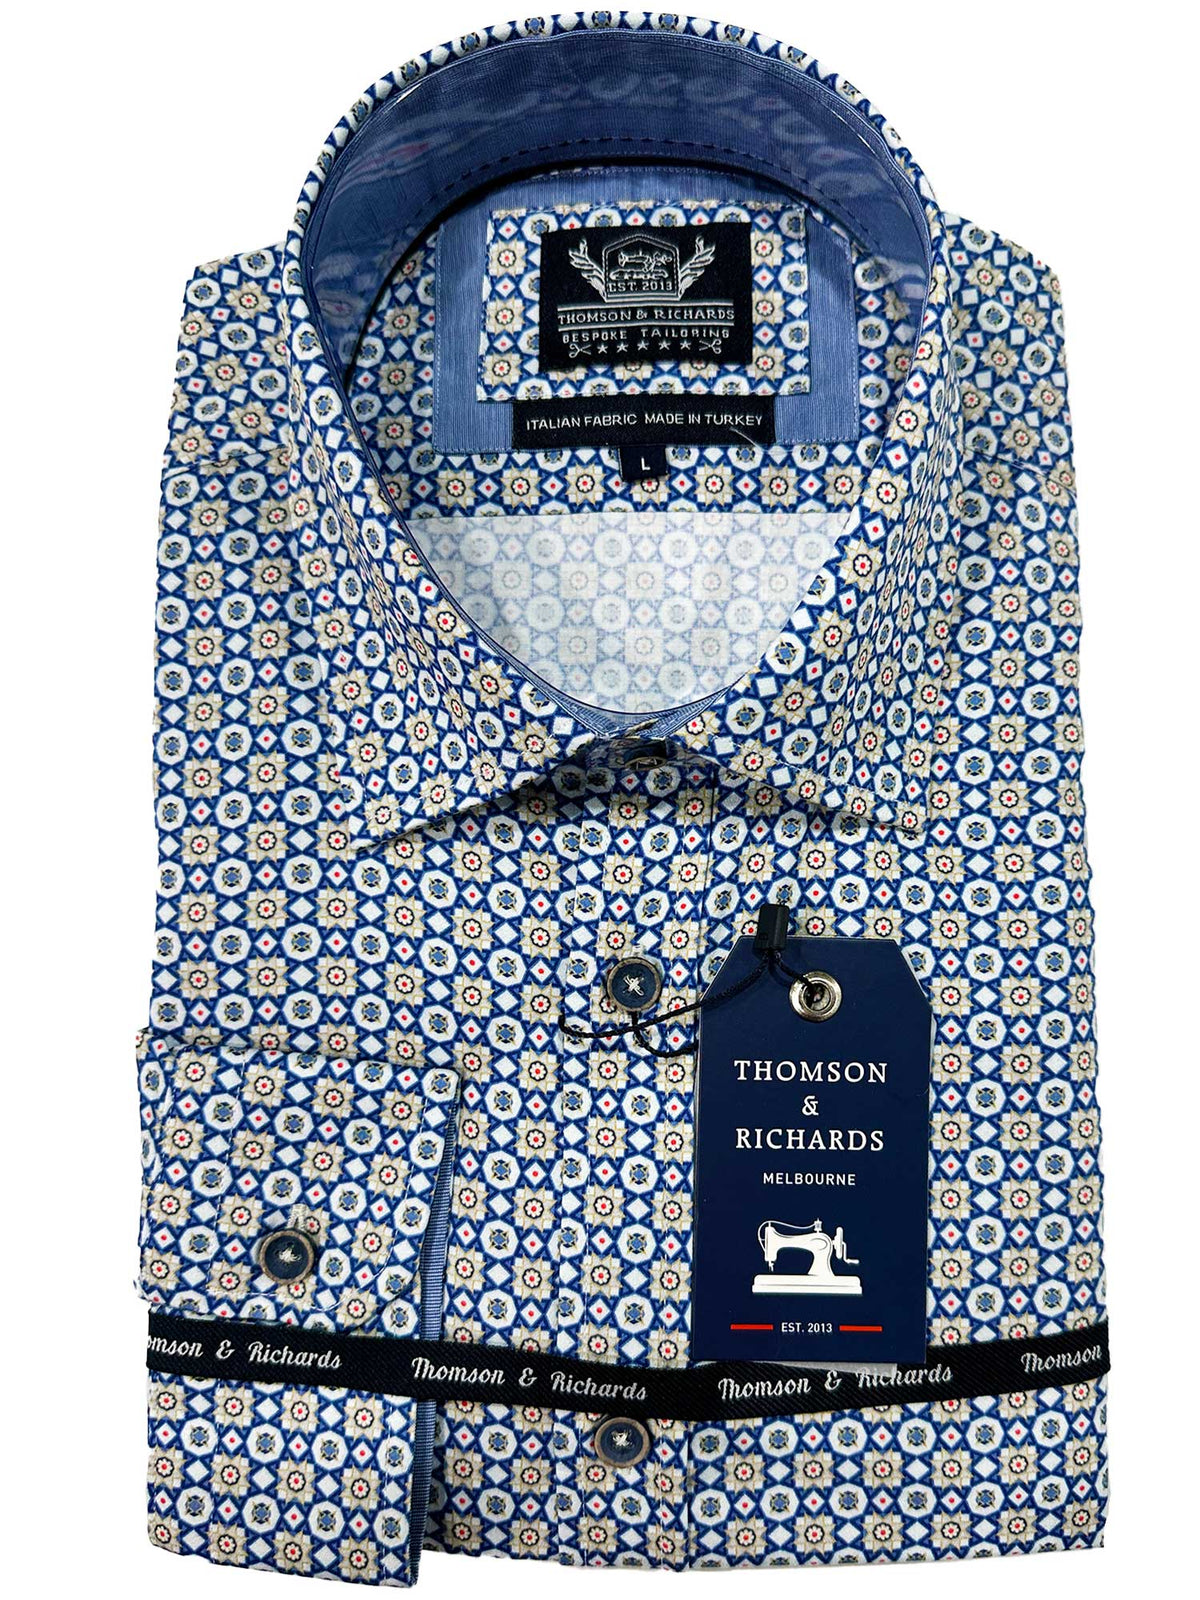 Roy Shirt L/S  https://harrysformenswear.com.au/products/roy-shirt-l-s  Since 1963, Thomson & Richards has stayed true to its shirt making heritage and has become one of the industry's top menswear brands. We take pride in our creative designs and high quality finish, using carefully selected fabrics that meet our customer's needs. Our modern, easy to wear styles are perfect for any man's …